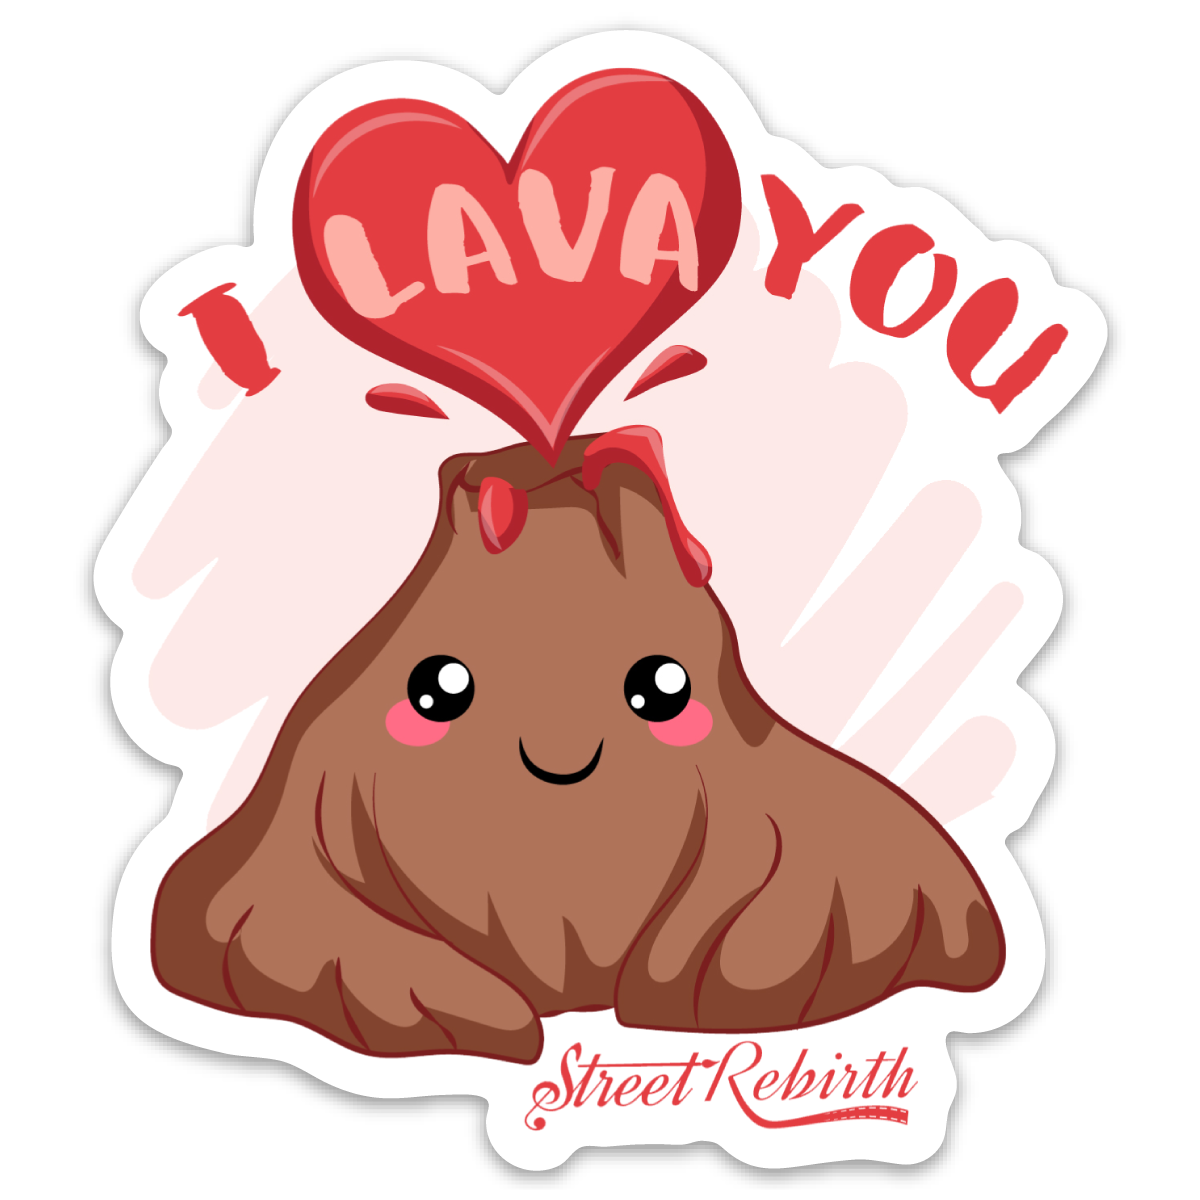 I lAVA YOU STICKER – ONE 4 INCH WATER PROOF VINYL STICKER – FOR HYDRO FLASK, SKATEBOARD, LAPTOP, PLANNER, CAR, COLLECTING, GIFTING